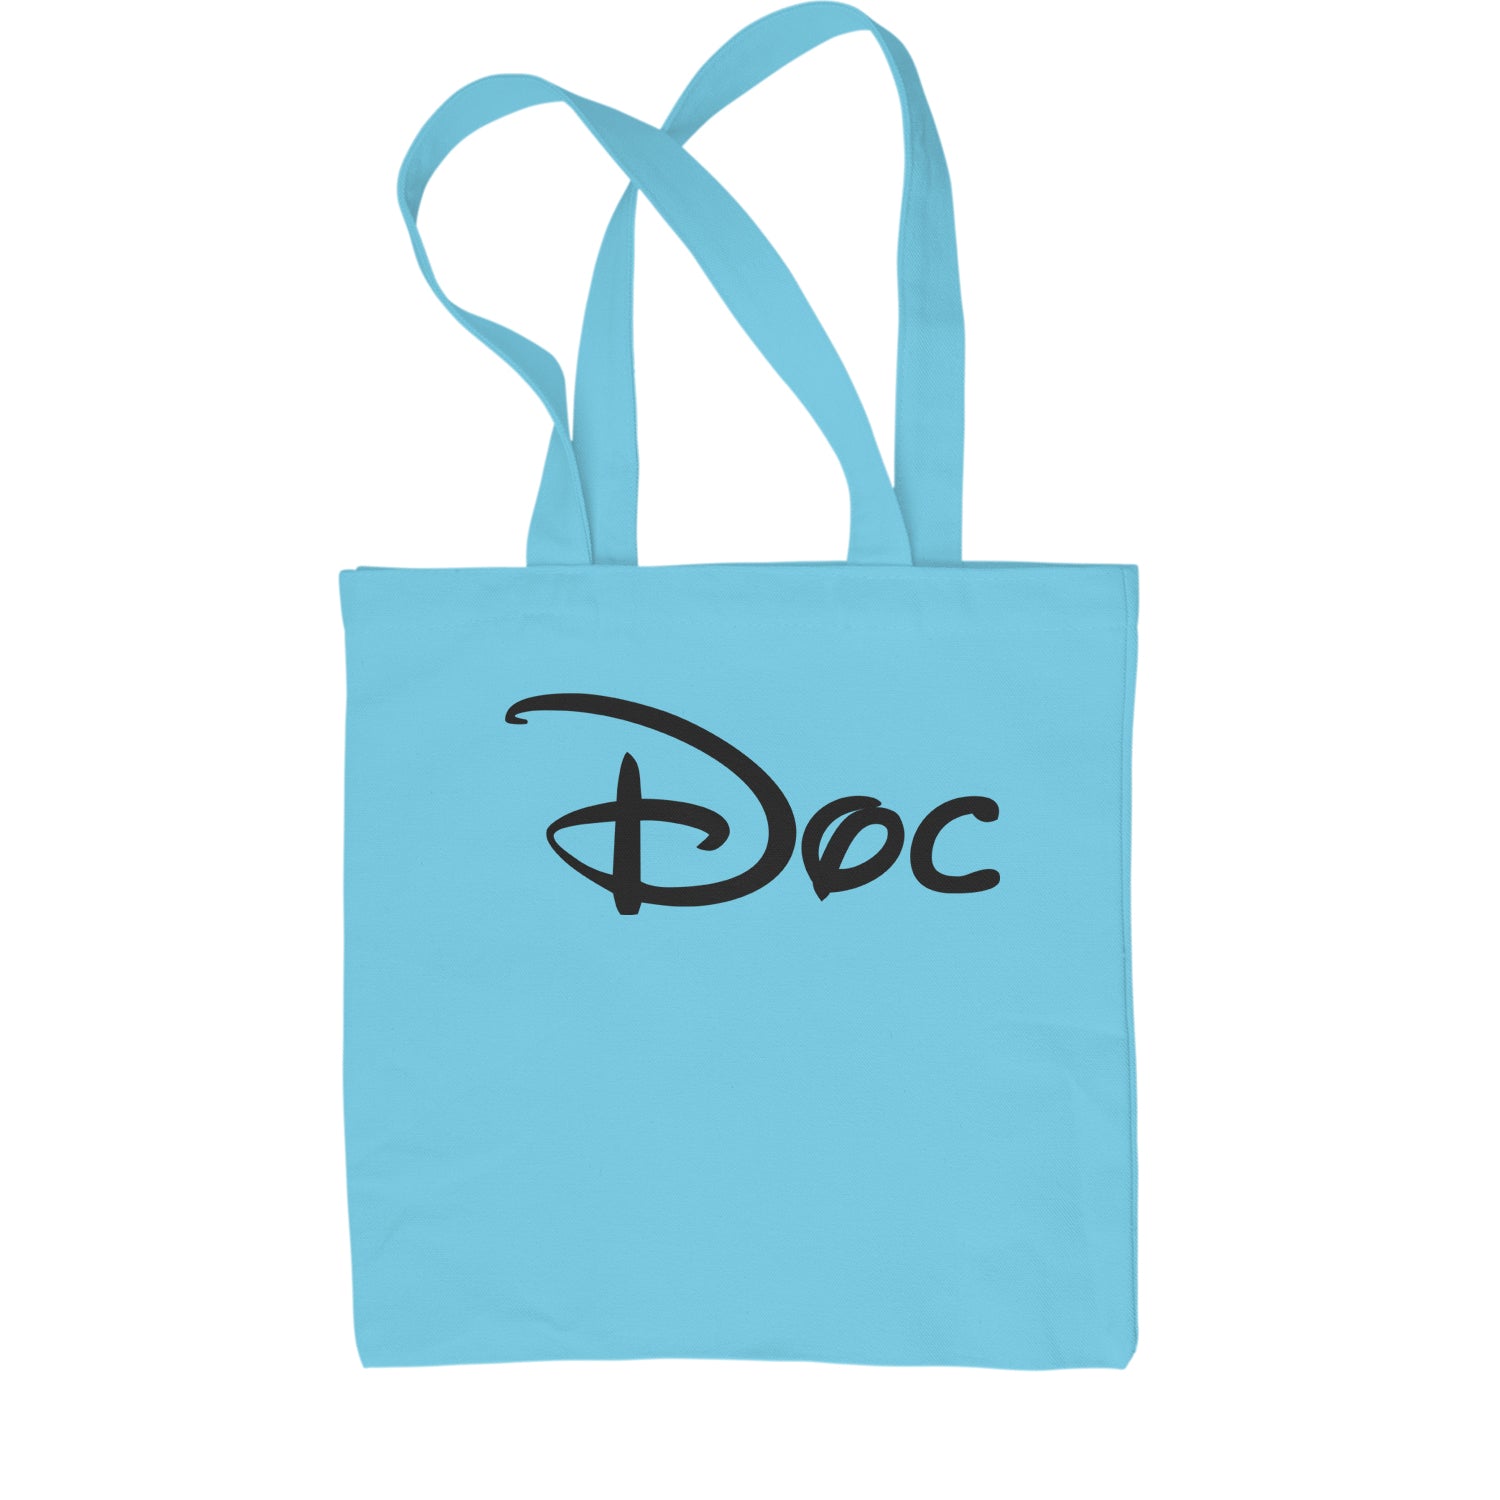 Doc - 7 Dwarfs Costume Shopping Tote Bag and, costume, dwarfs, group, halloween, matching, seven, snow, the, white by Expression Tees